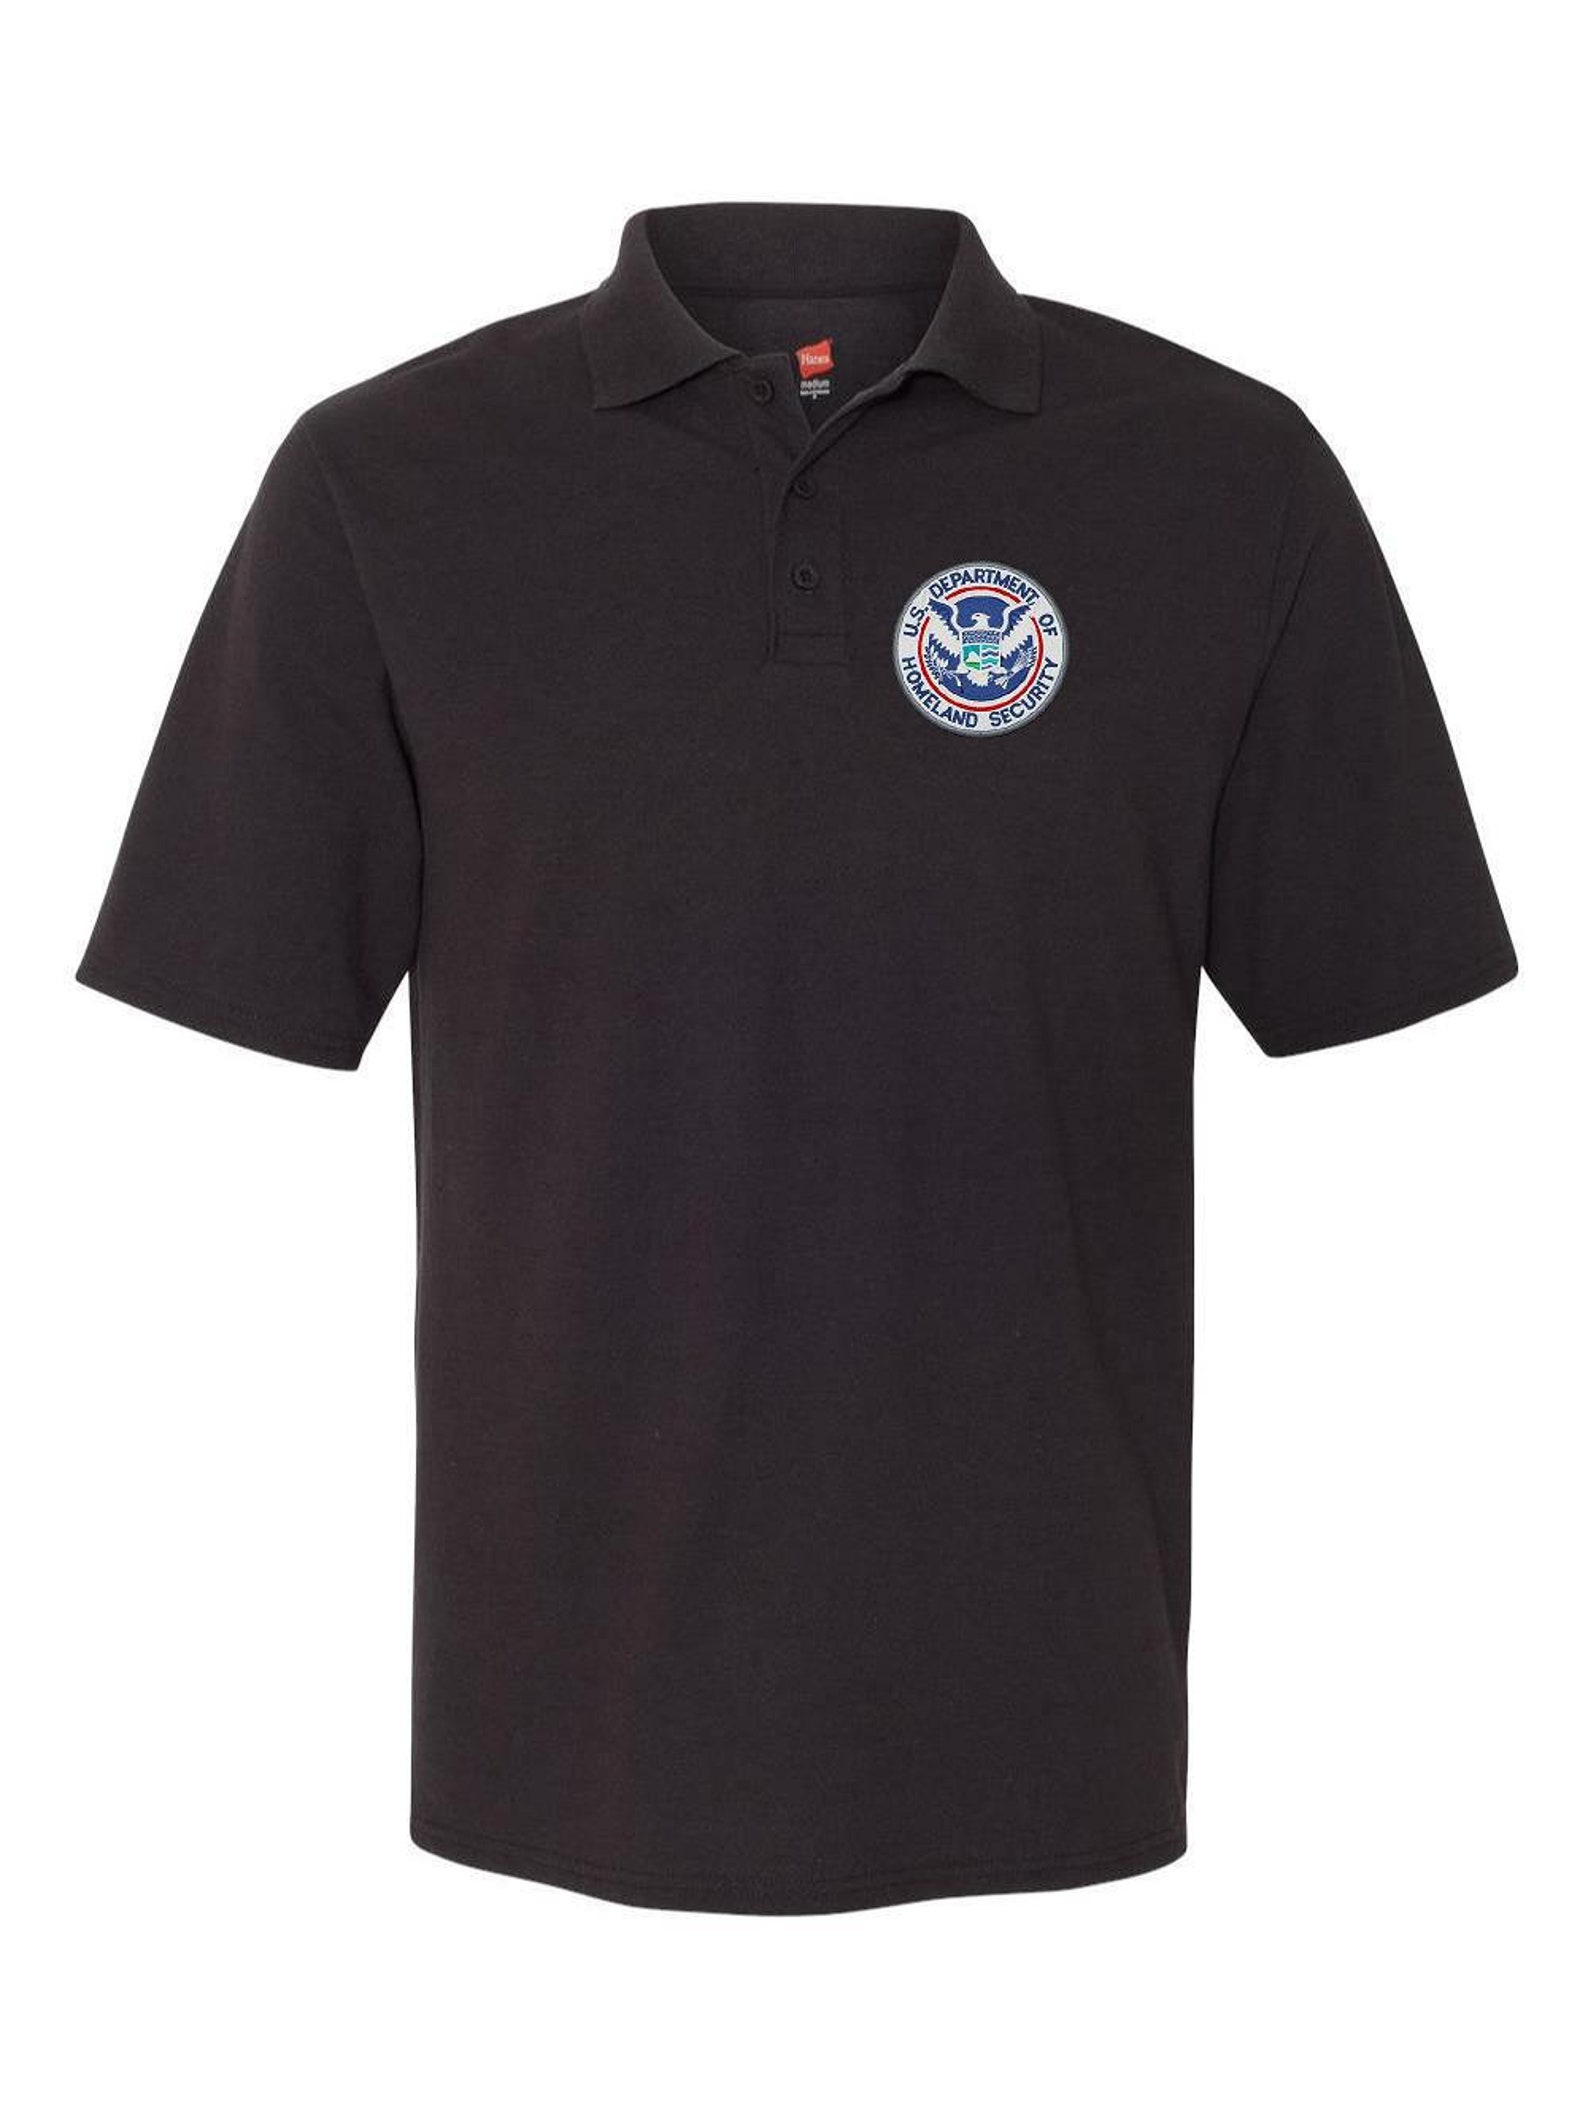 Dept. of Homeland Security Embroidered Polo Shirt 220-P - Etsy